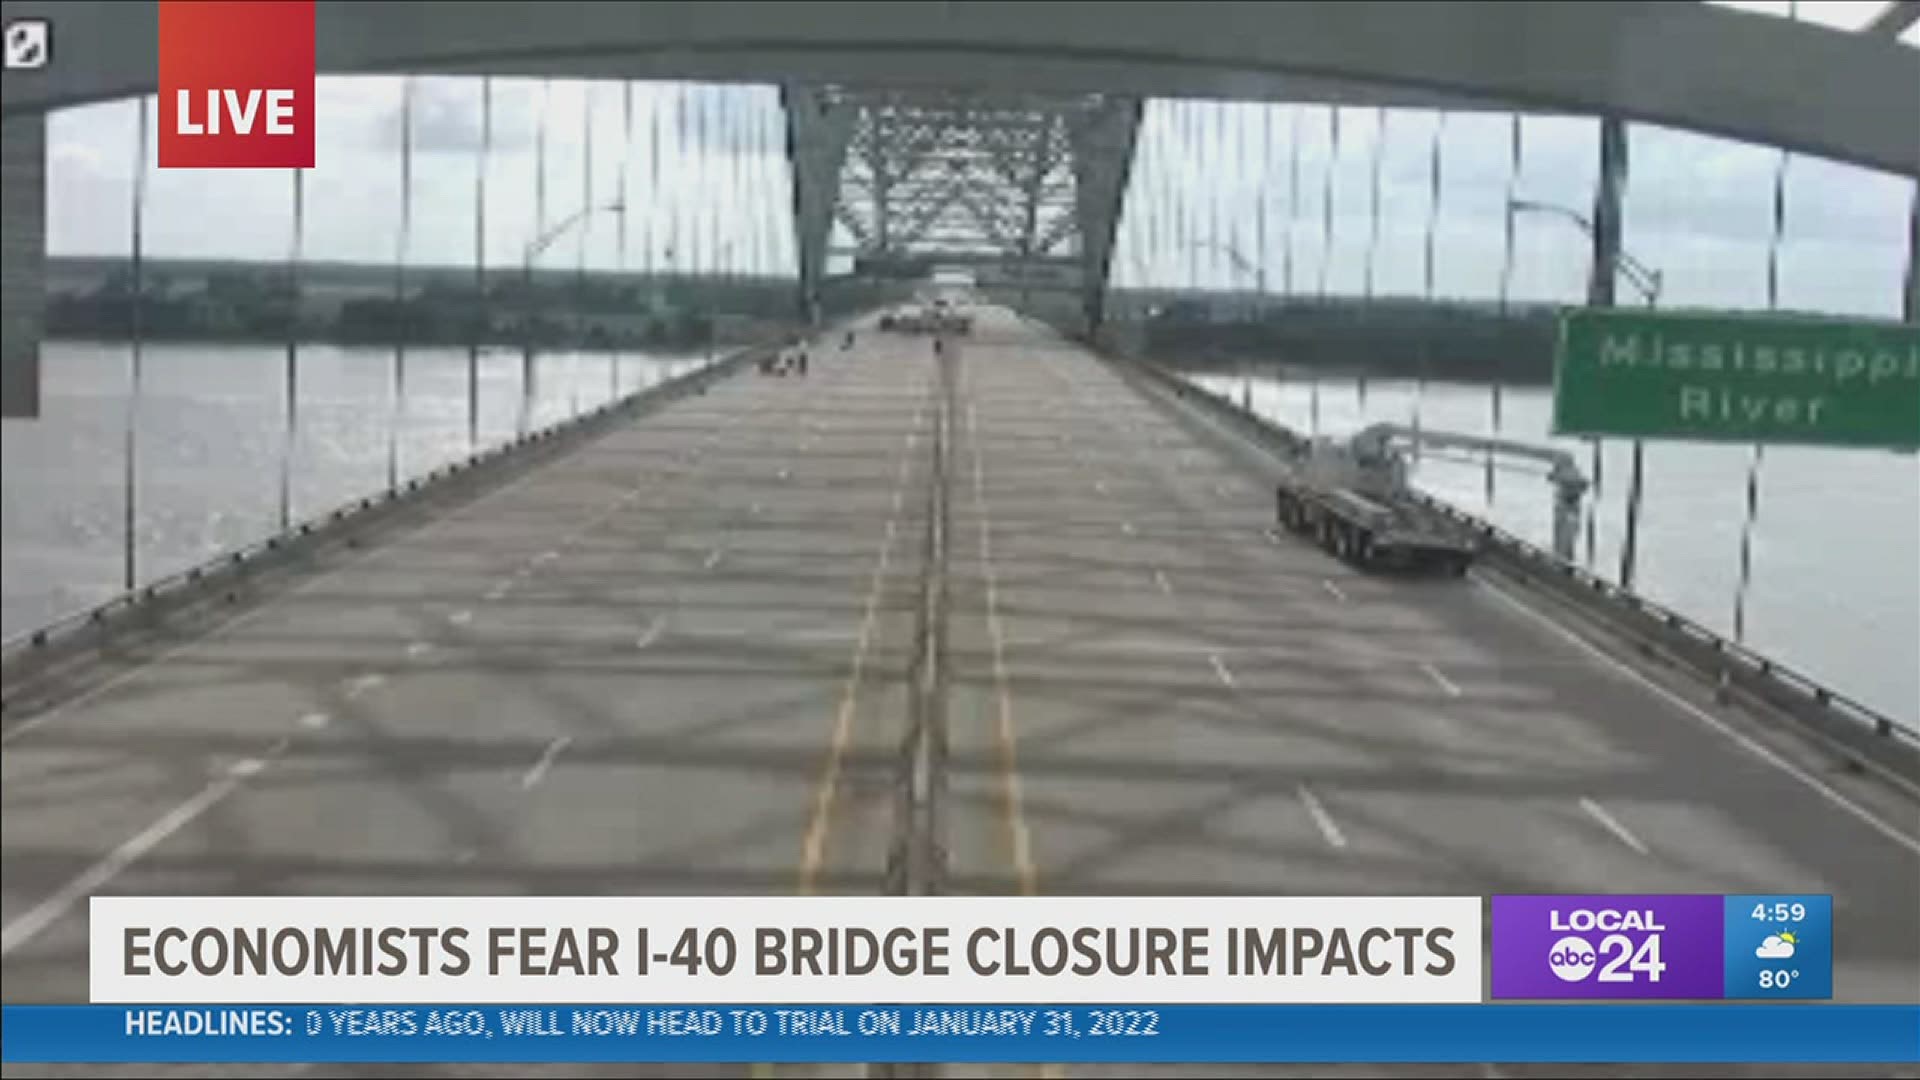 A second significant backup on I-55 bridge within a week comes ahead of USDOT Secretary’s visit to Memphis Thursday to review and update construction.